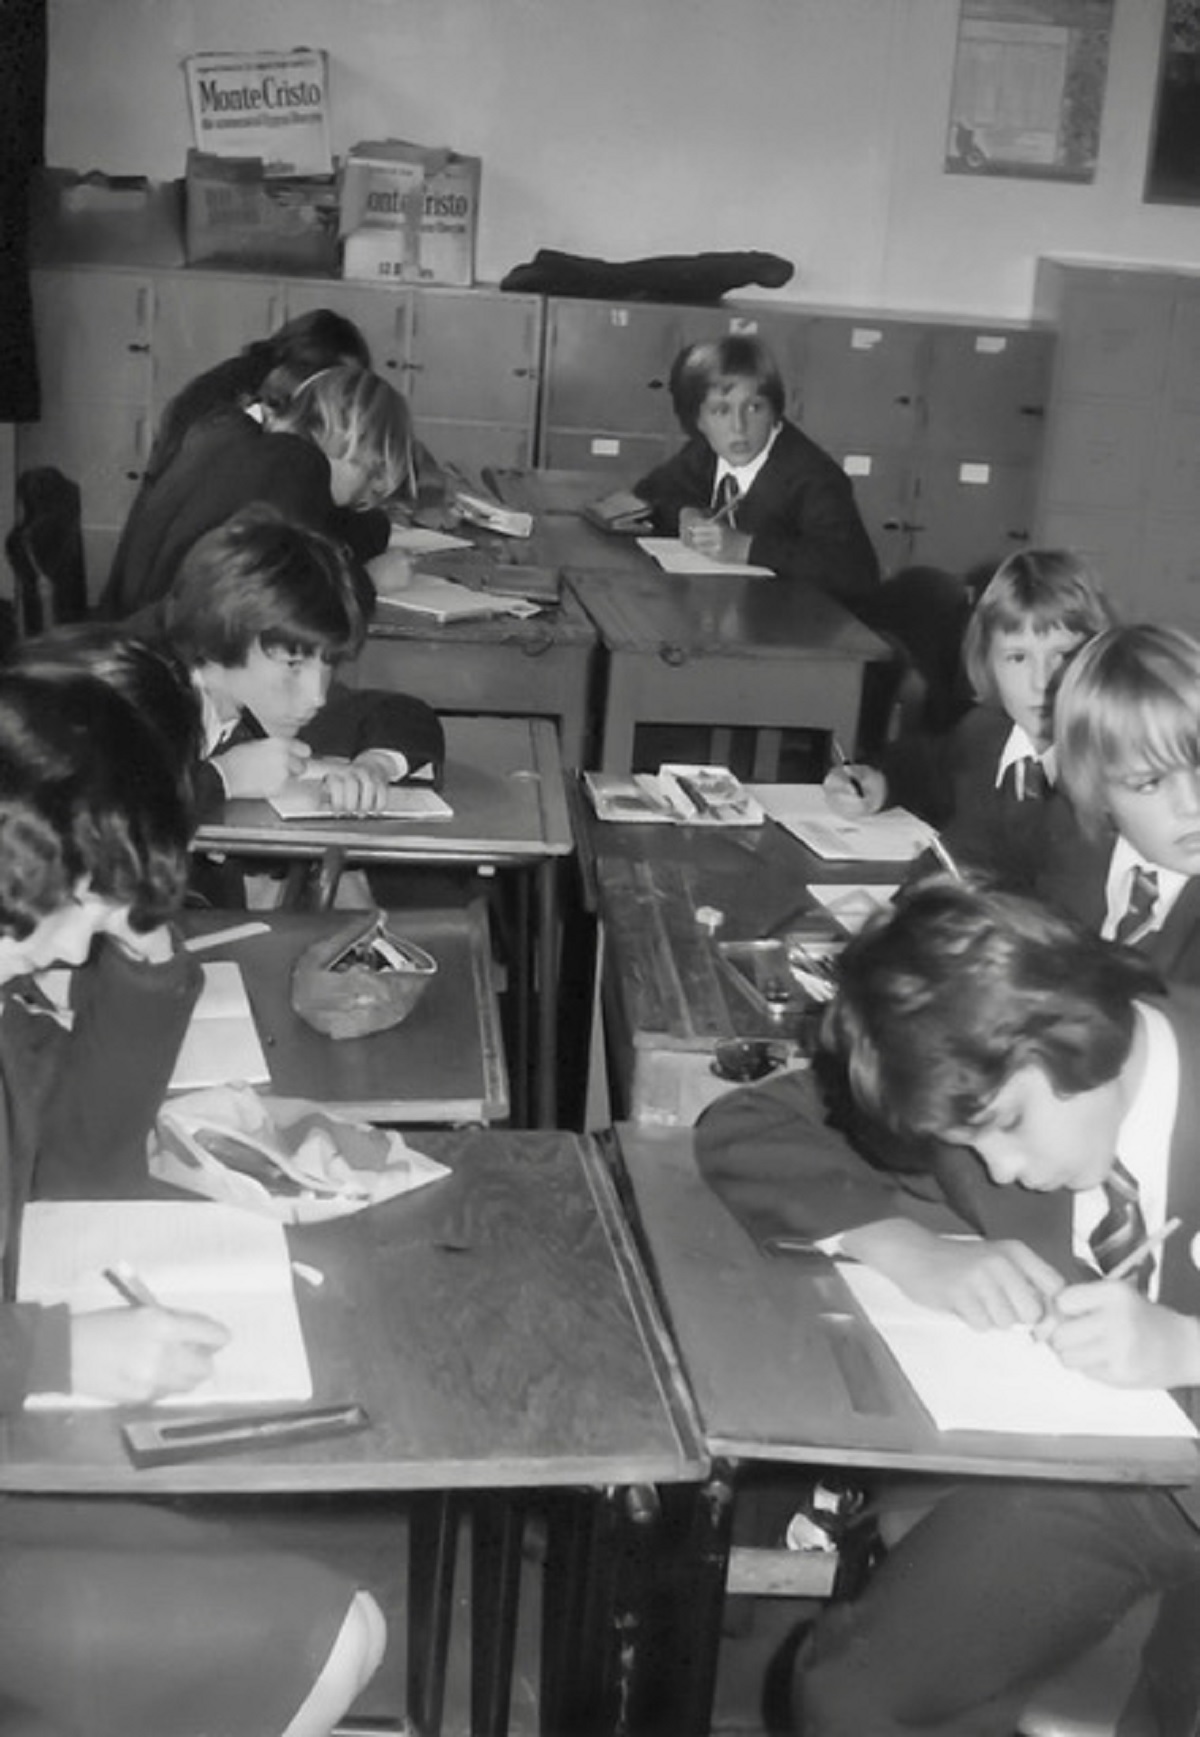 Beavering away - students hard at work in the late 1970s